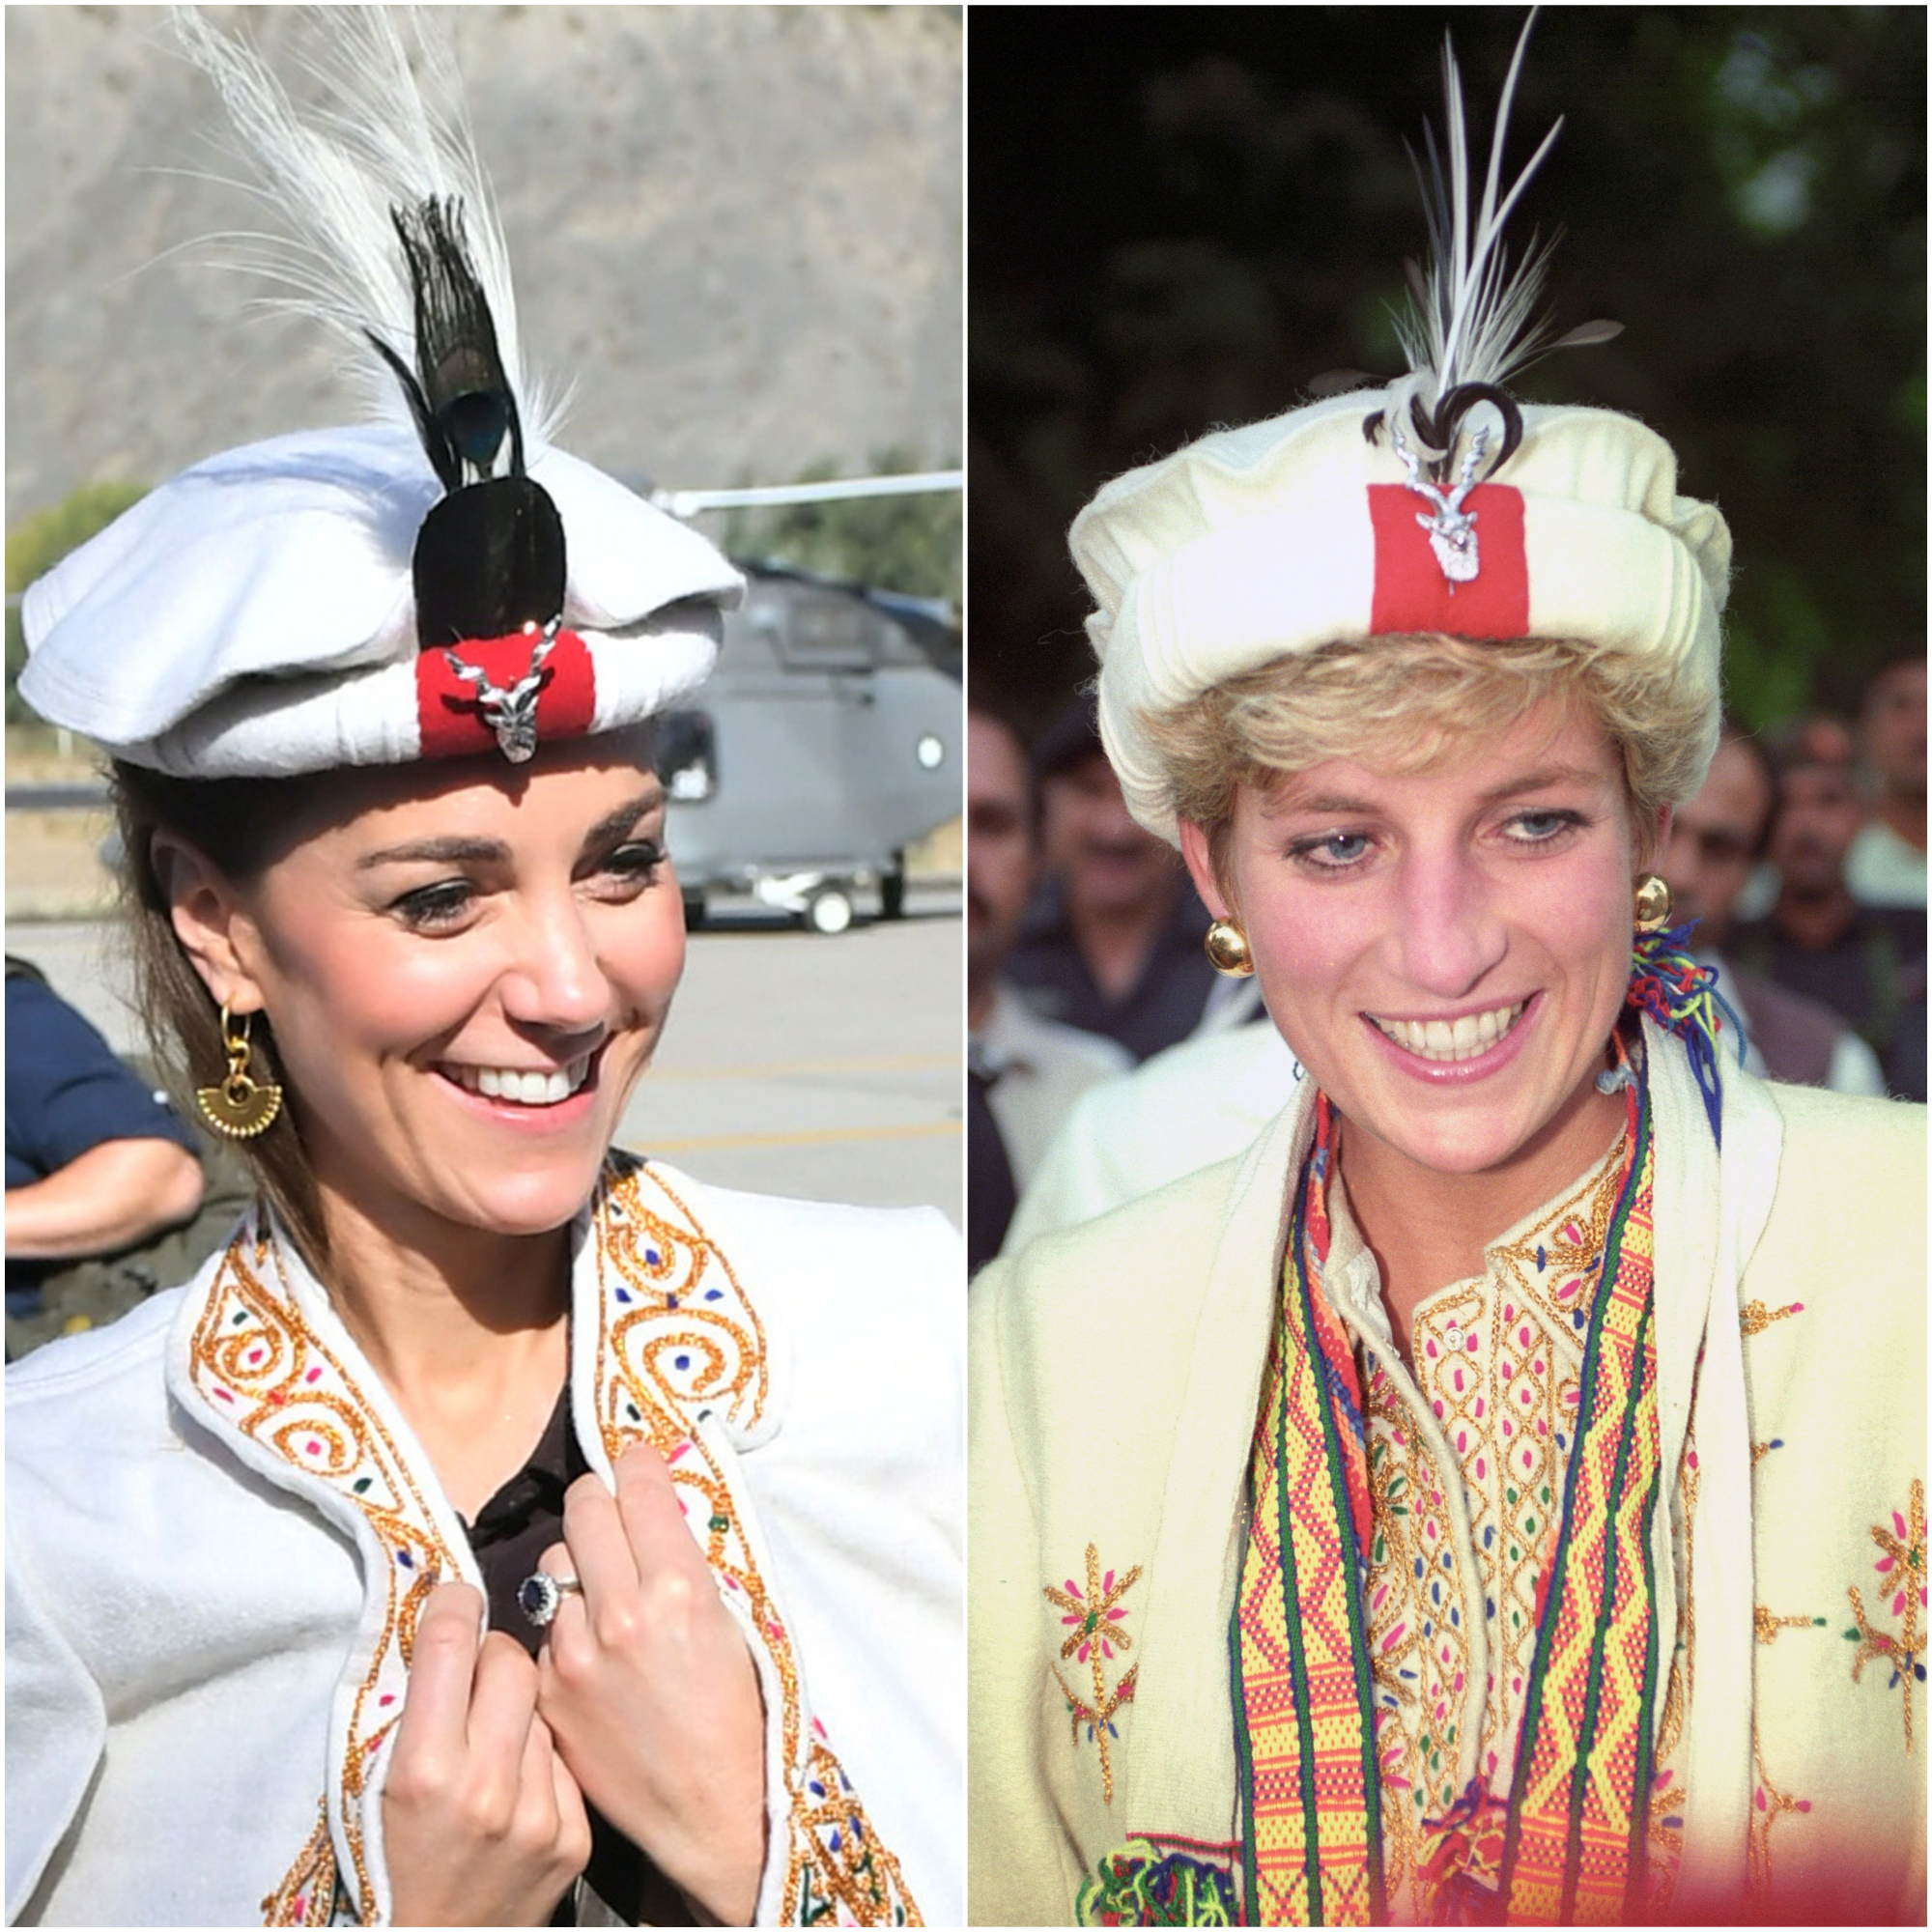 Kate and Diana, pictured in 1991, in similar hats during visits to Chitral (Sam Husssein/Martin Keene/PA)